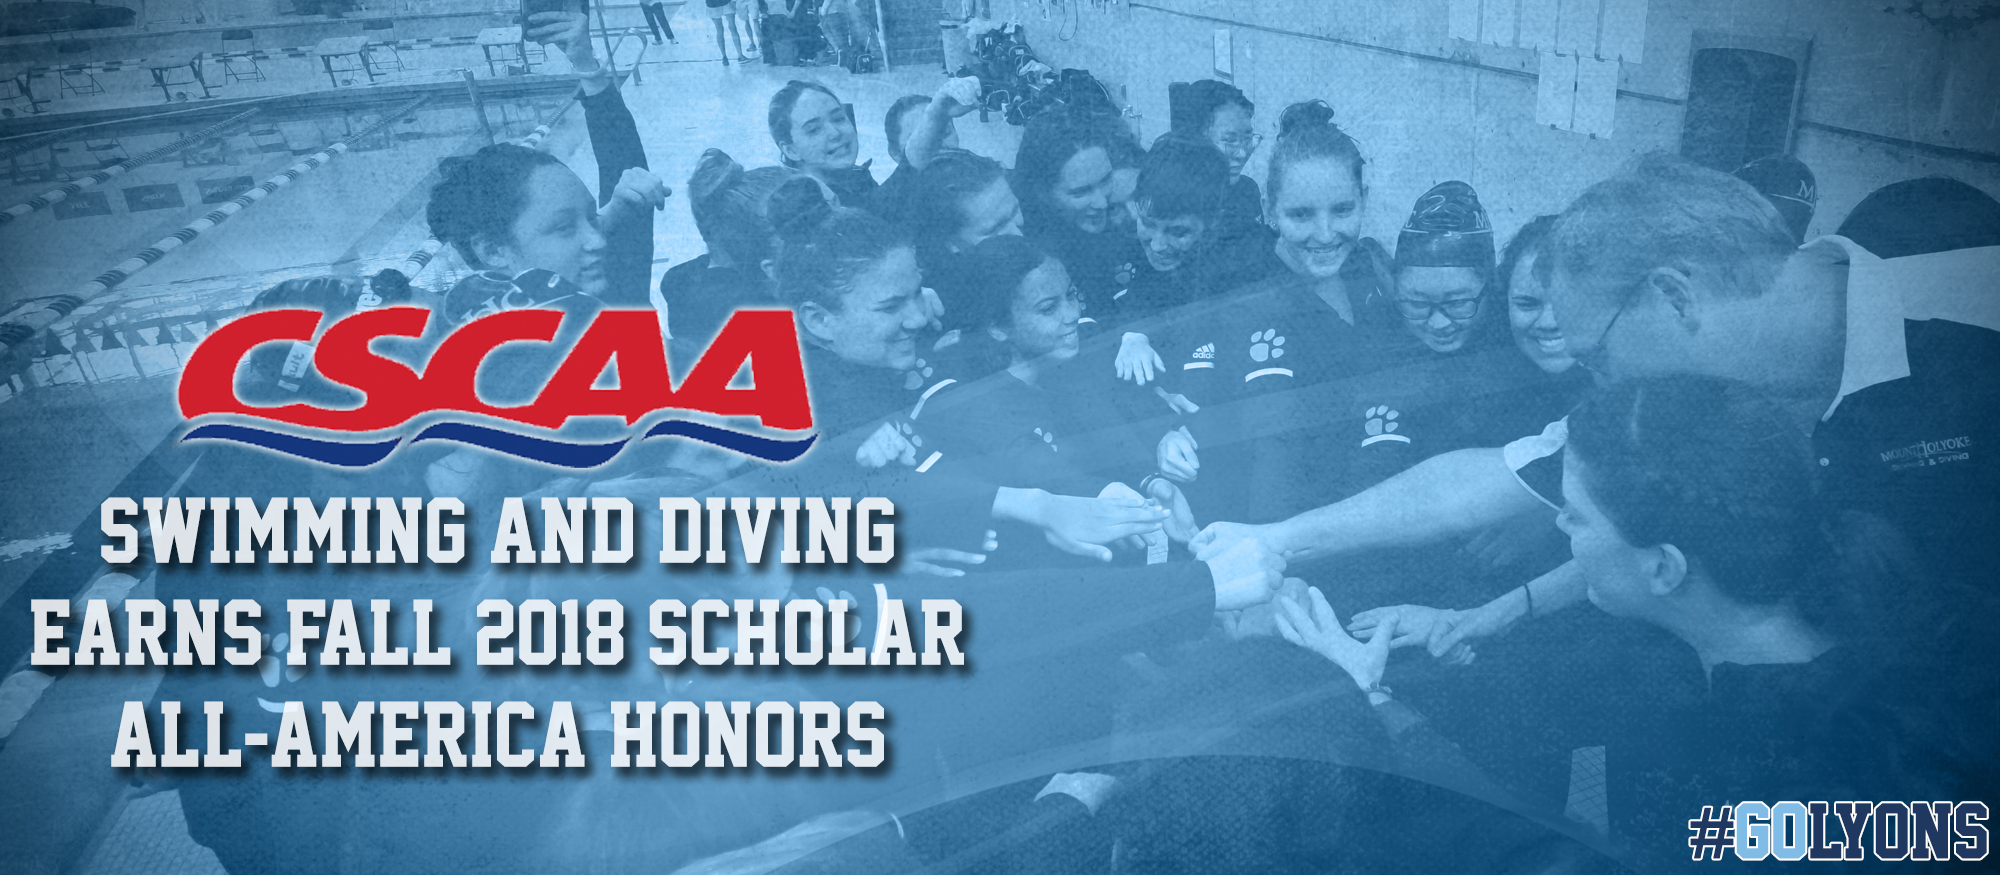 Team huddle graphic for the squad's honoring as a CSCAA Scholar All-America Team for Fall 2018.